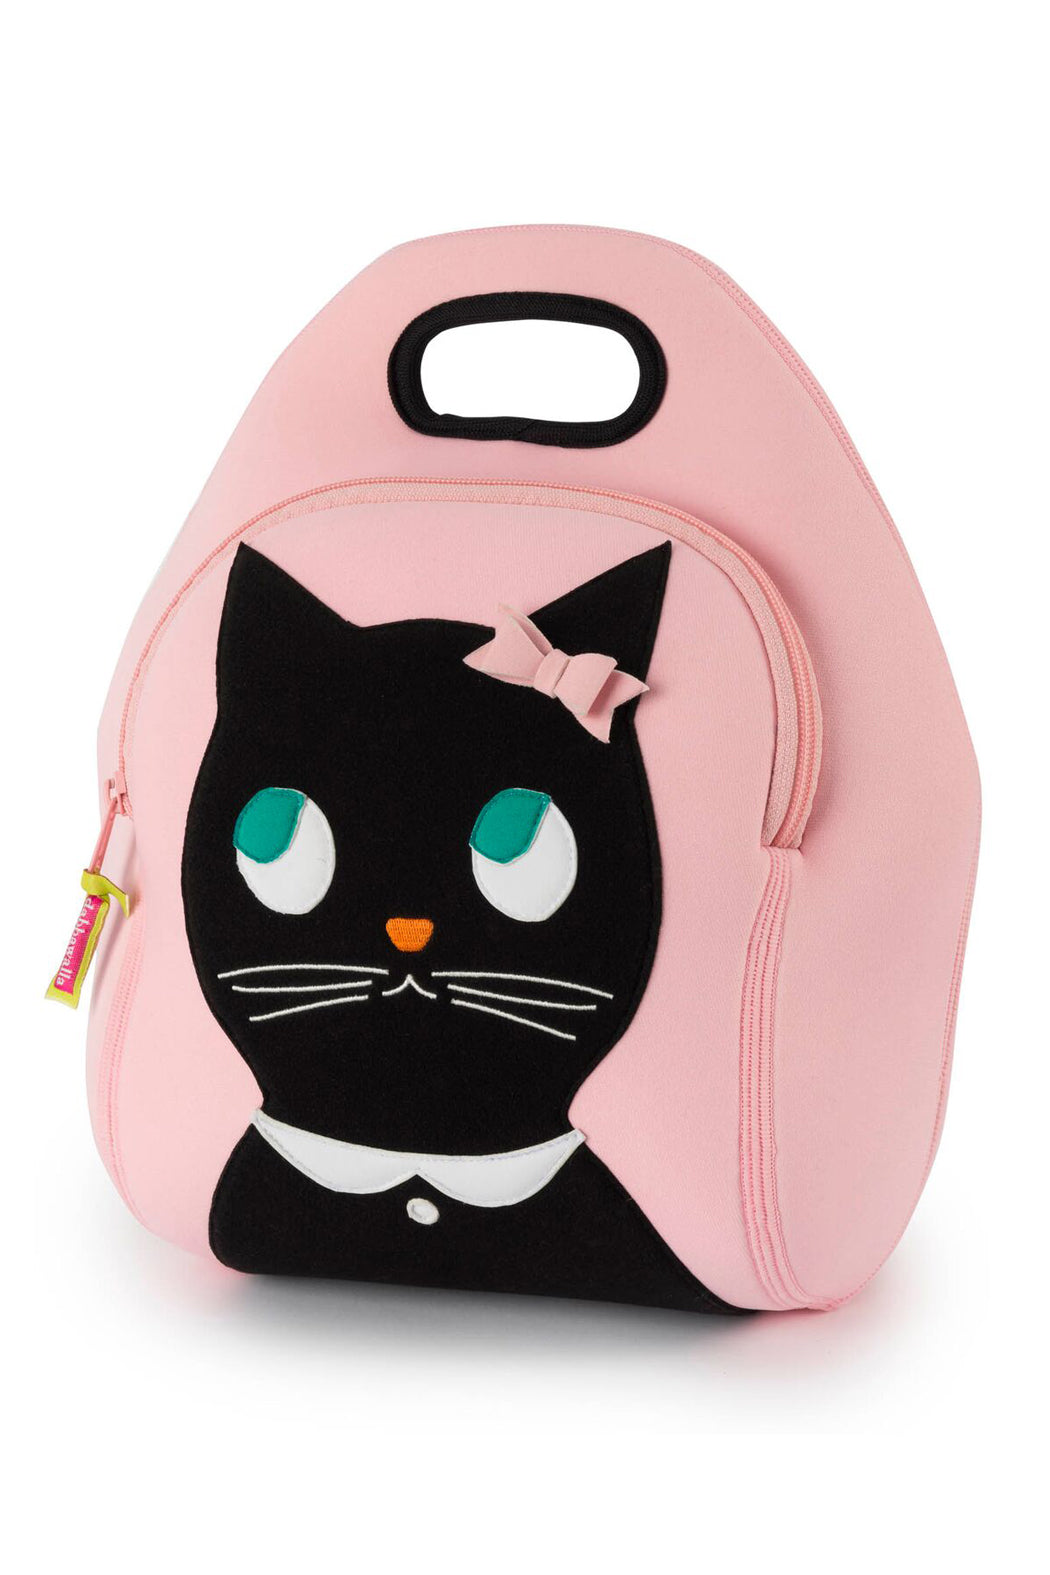 Miss Kitty Lunch bag